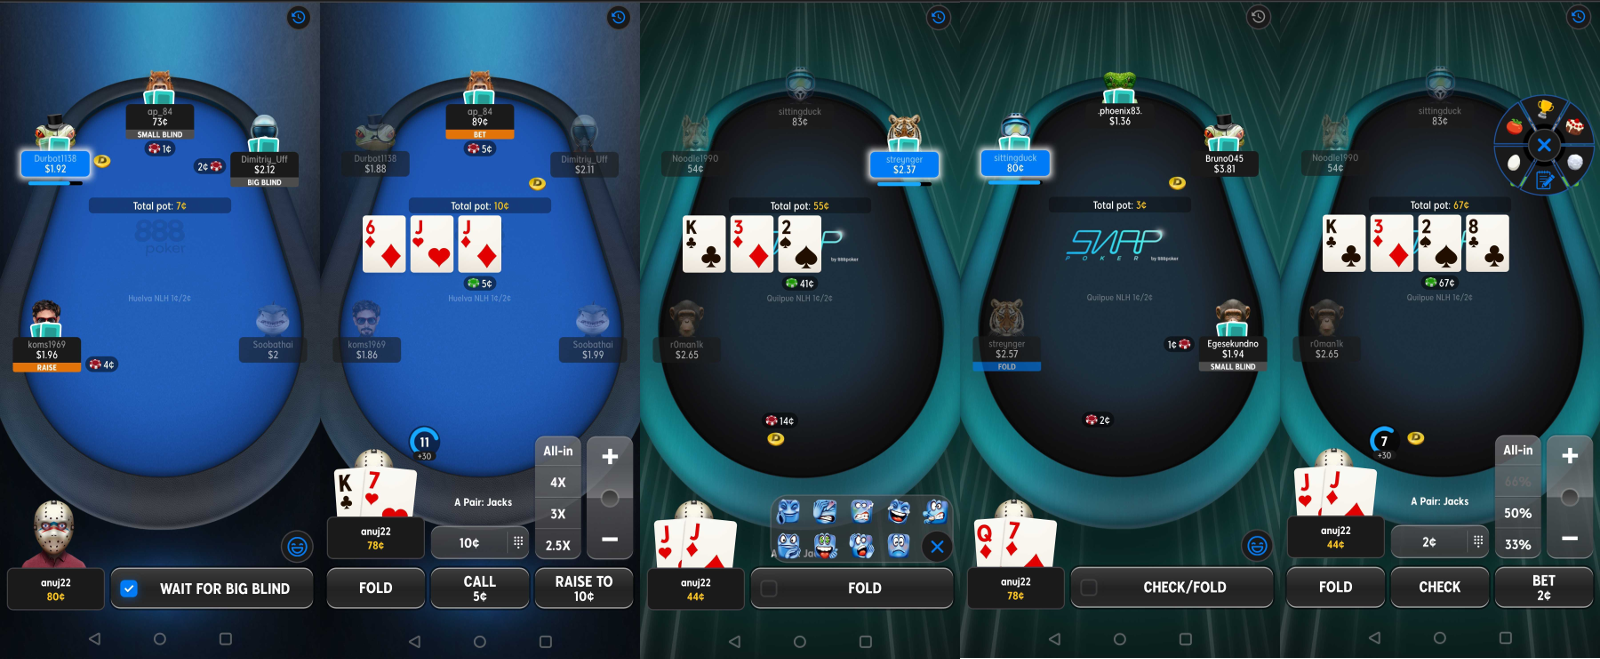 Engrave haircut mate 888poker Rolls Out Overhauled Android Mobile App | Pokerfuse